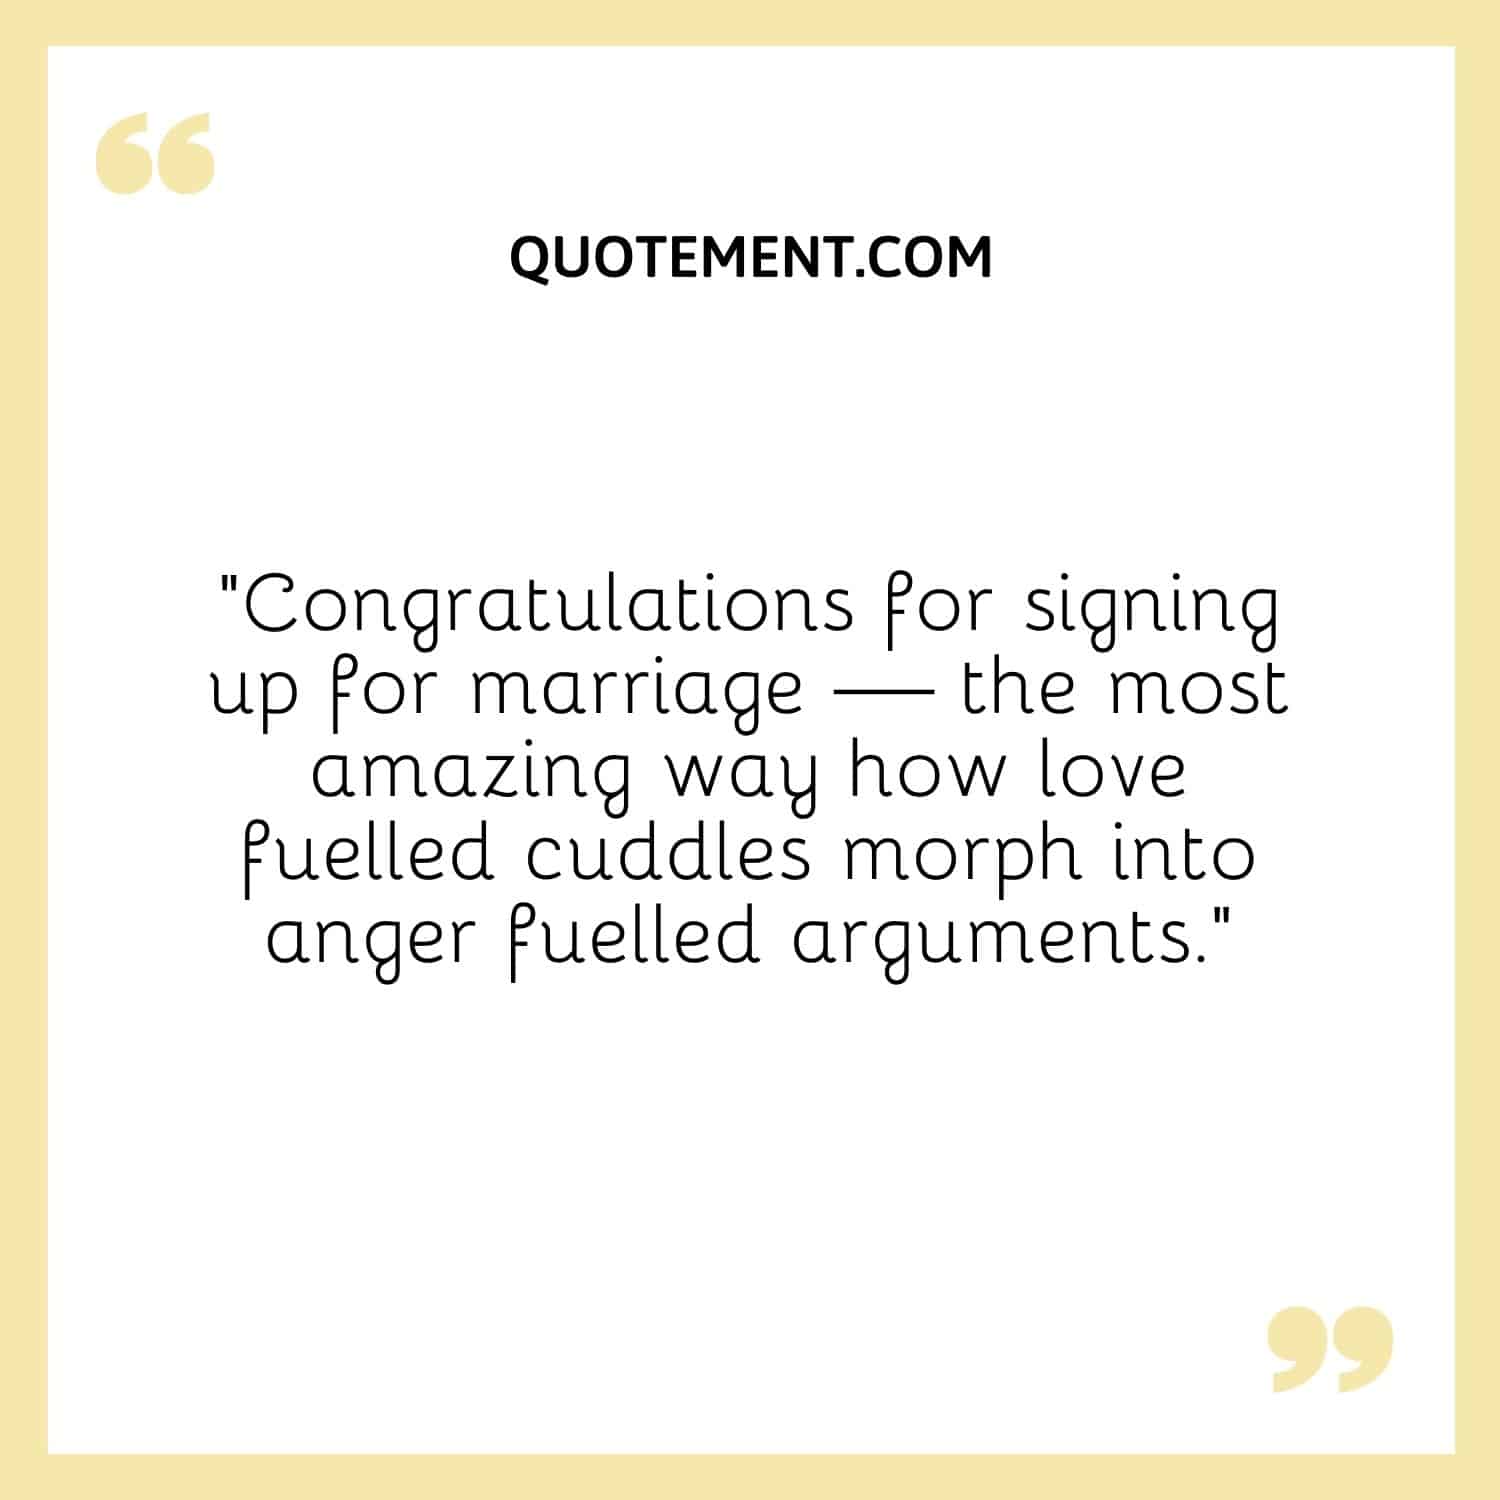 Congratulations for signing up for marriage